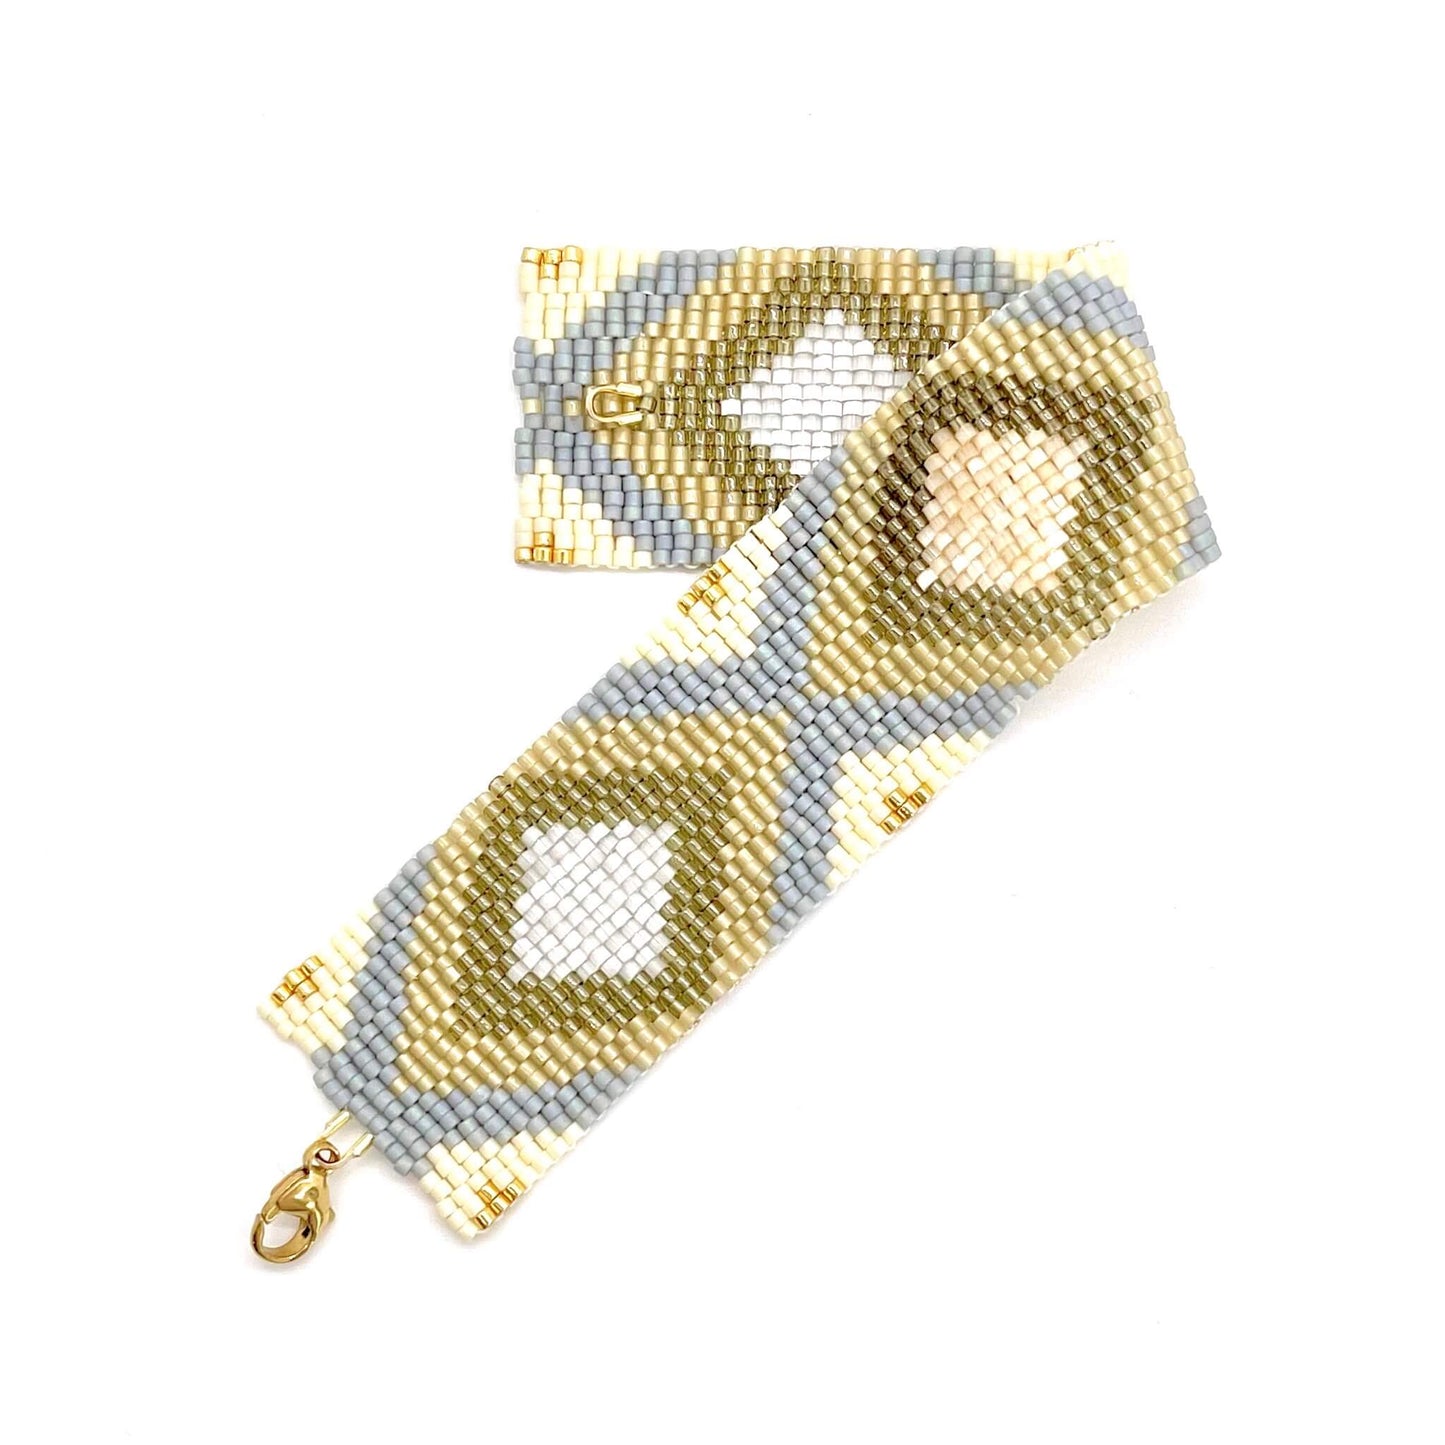 Stylish modern neutral tone wide woven beaded cuff bracelet in summer shades of cream, gold, beige, tan and gray.